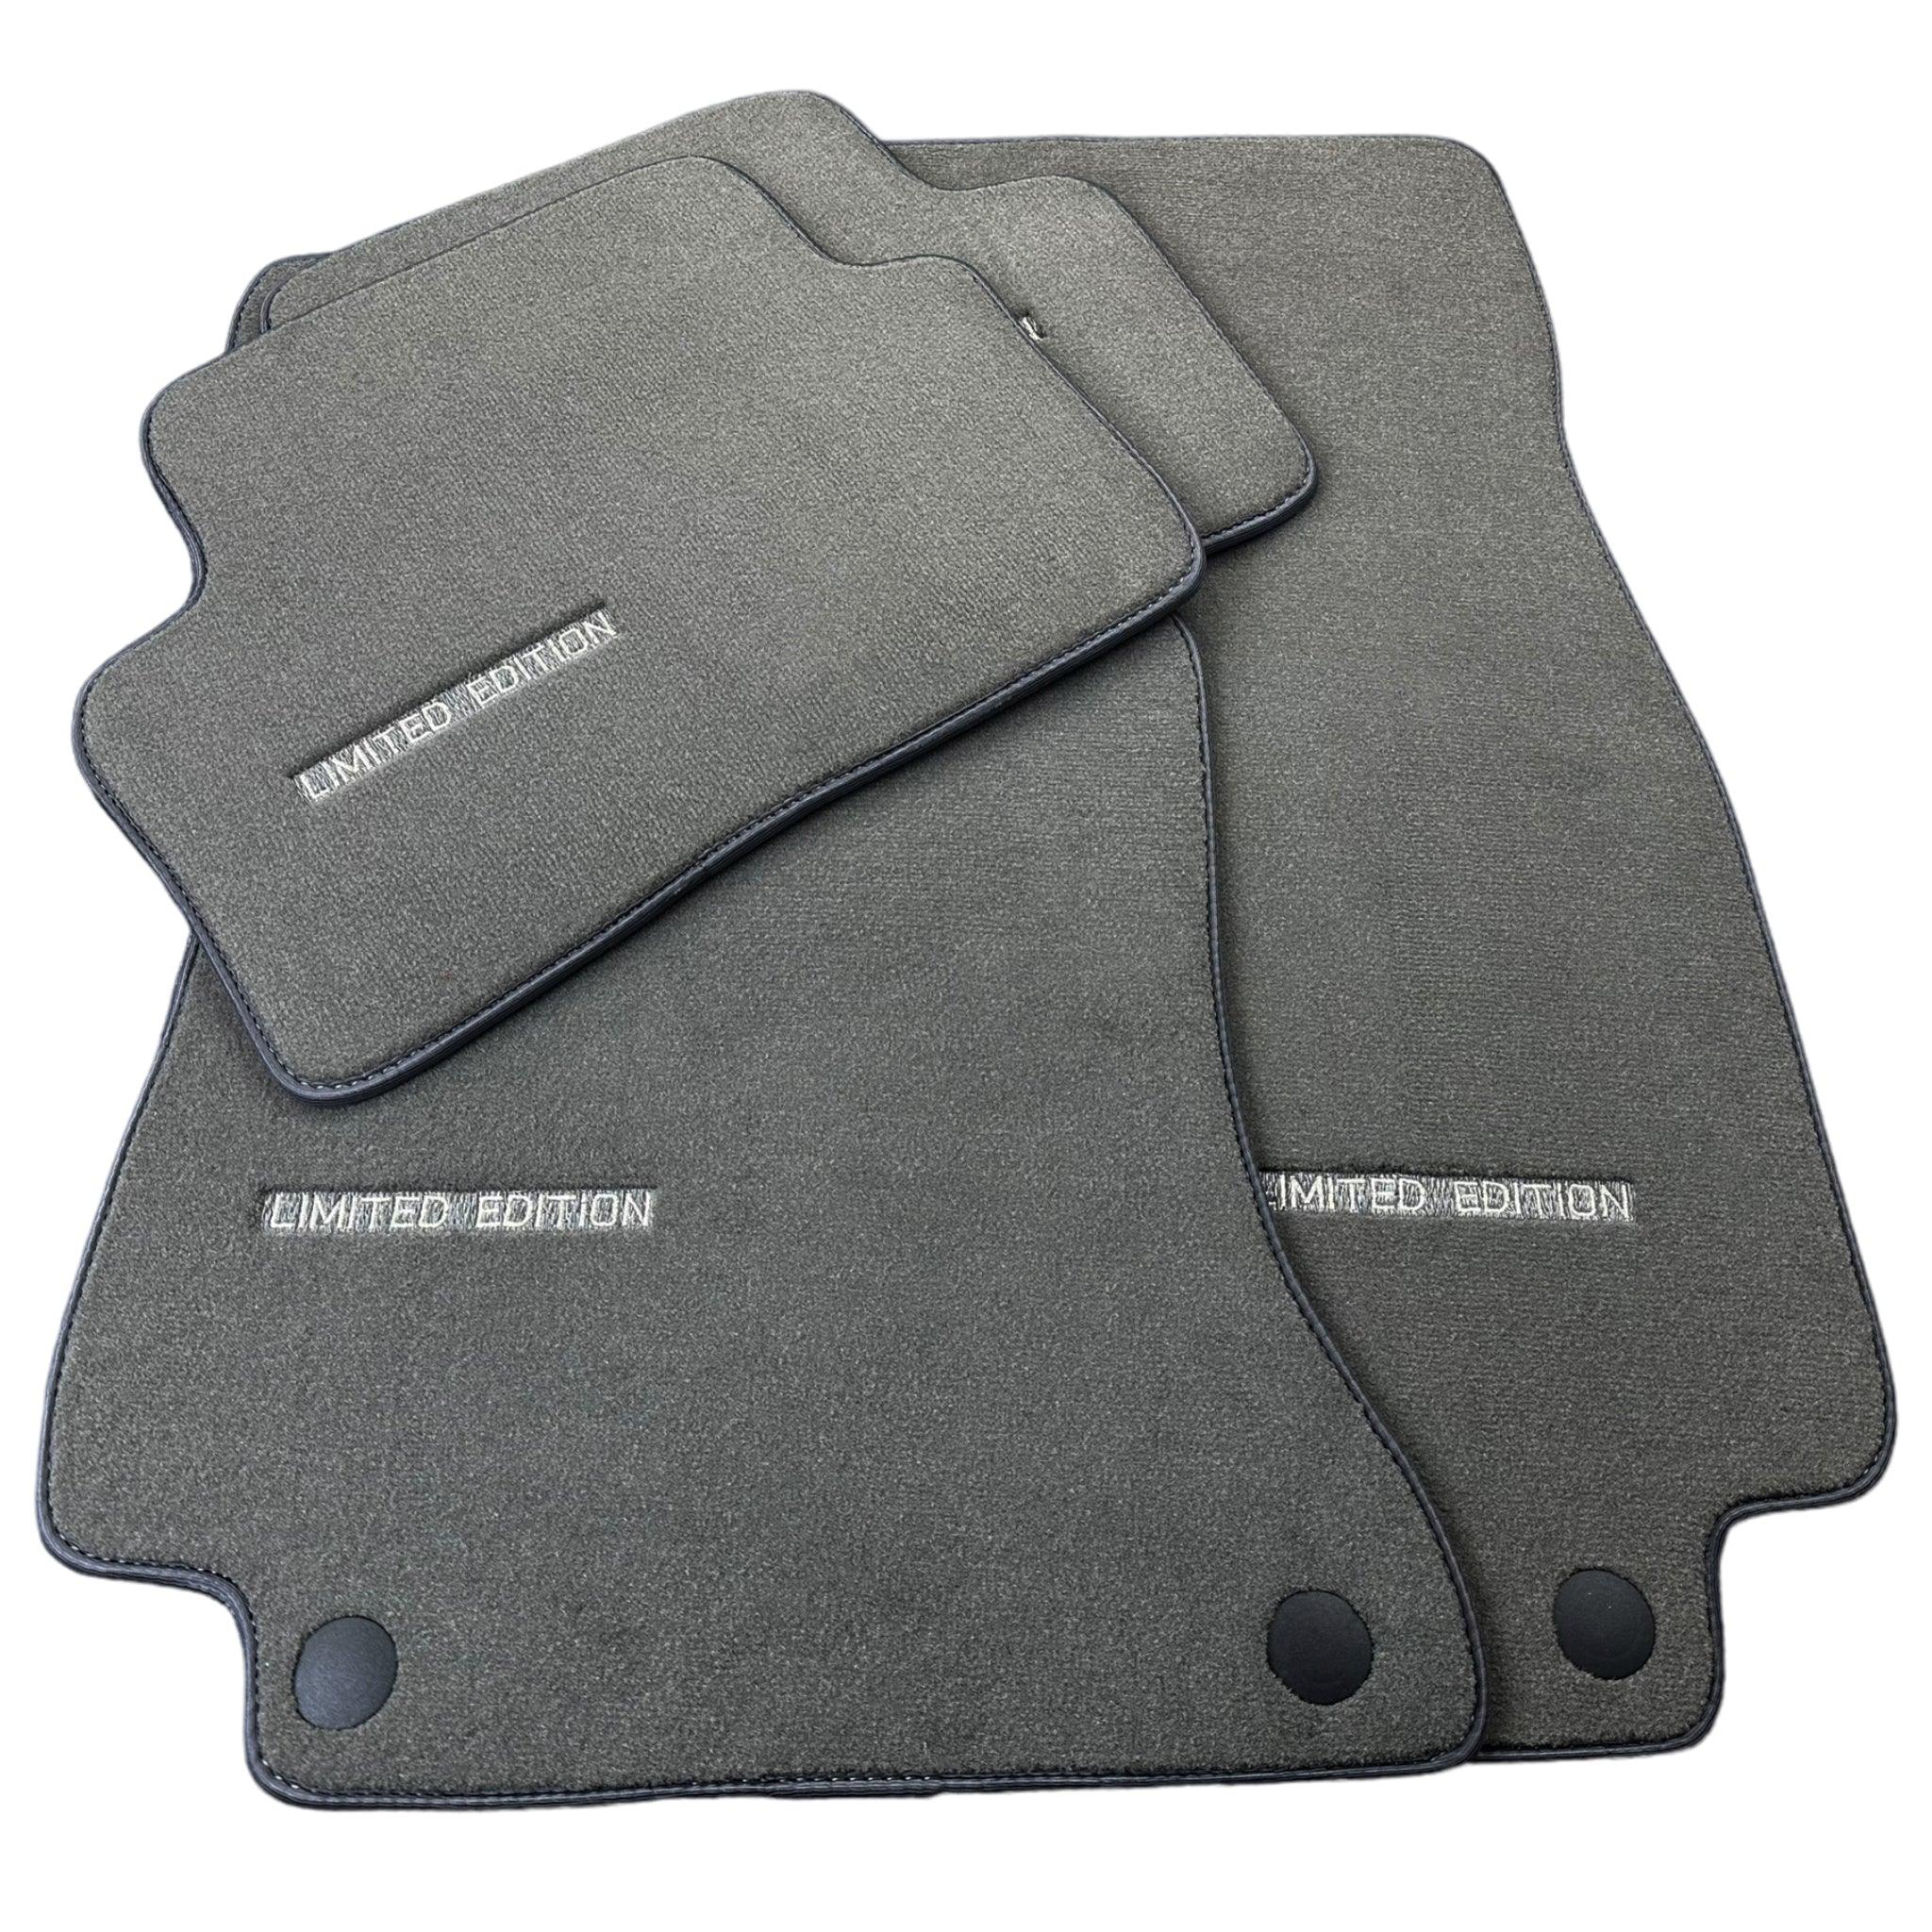 Gray Floor Mats For Mercedes Benz S-Class X222 Maybach (2015-2021) | Limited Edition